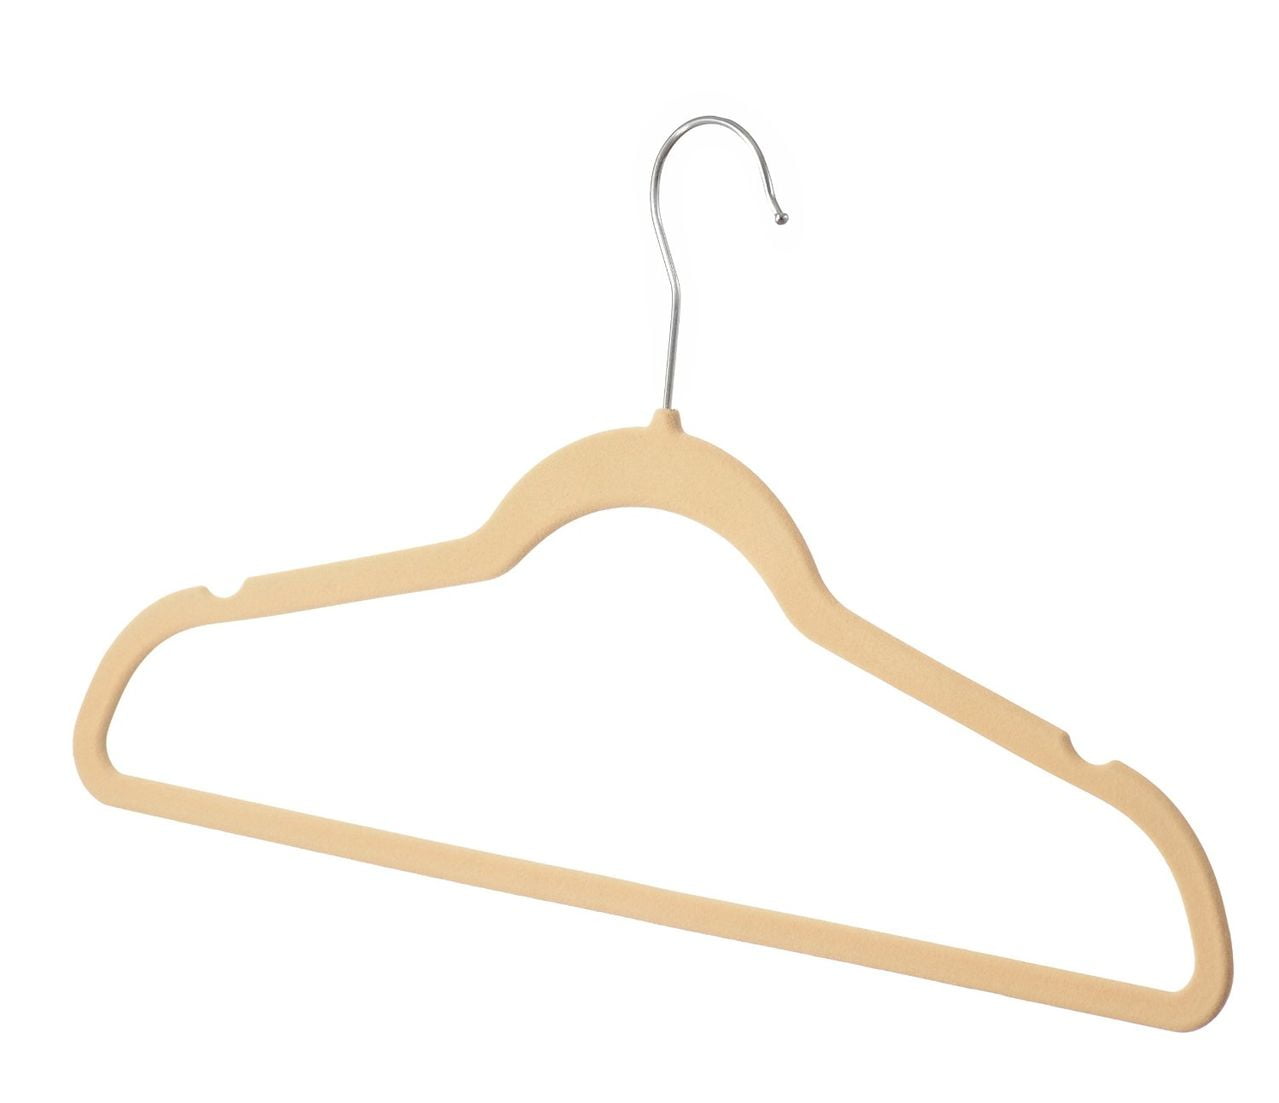 HOME-IT 50 PACK CLOTHES HANGERS CHOCOLATE VELVET HANGERS CLOTHES